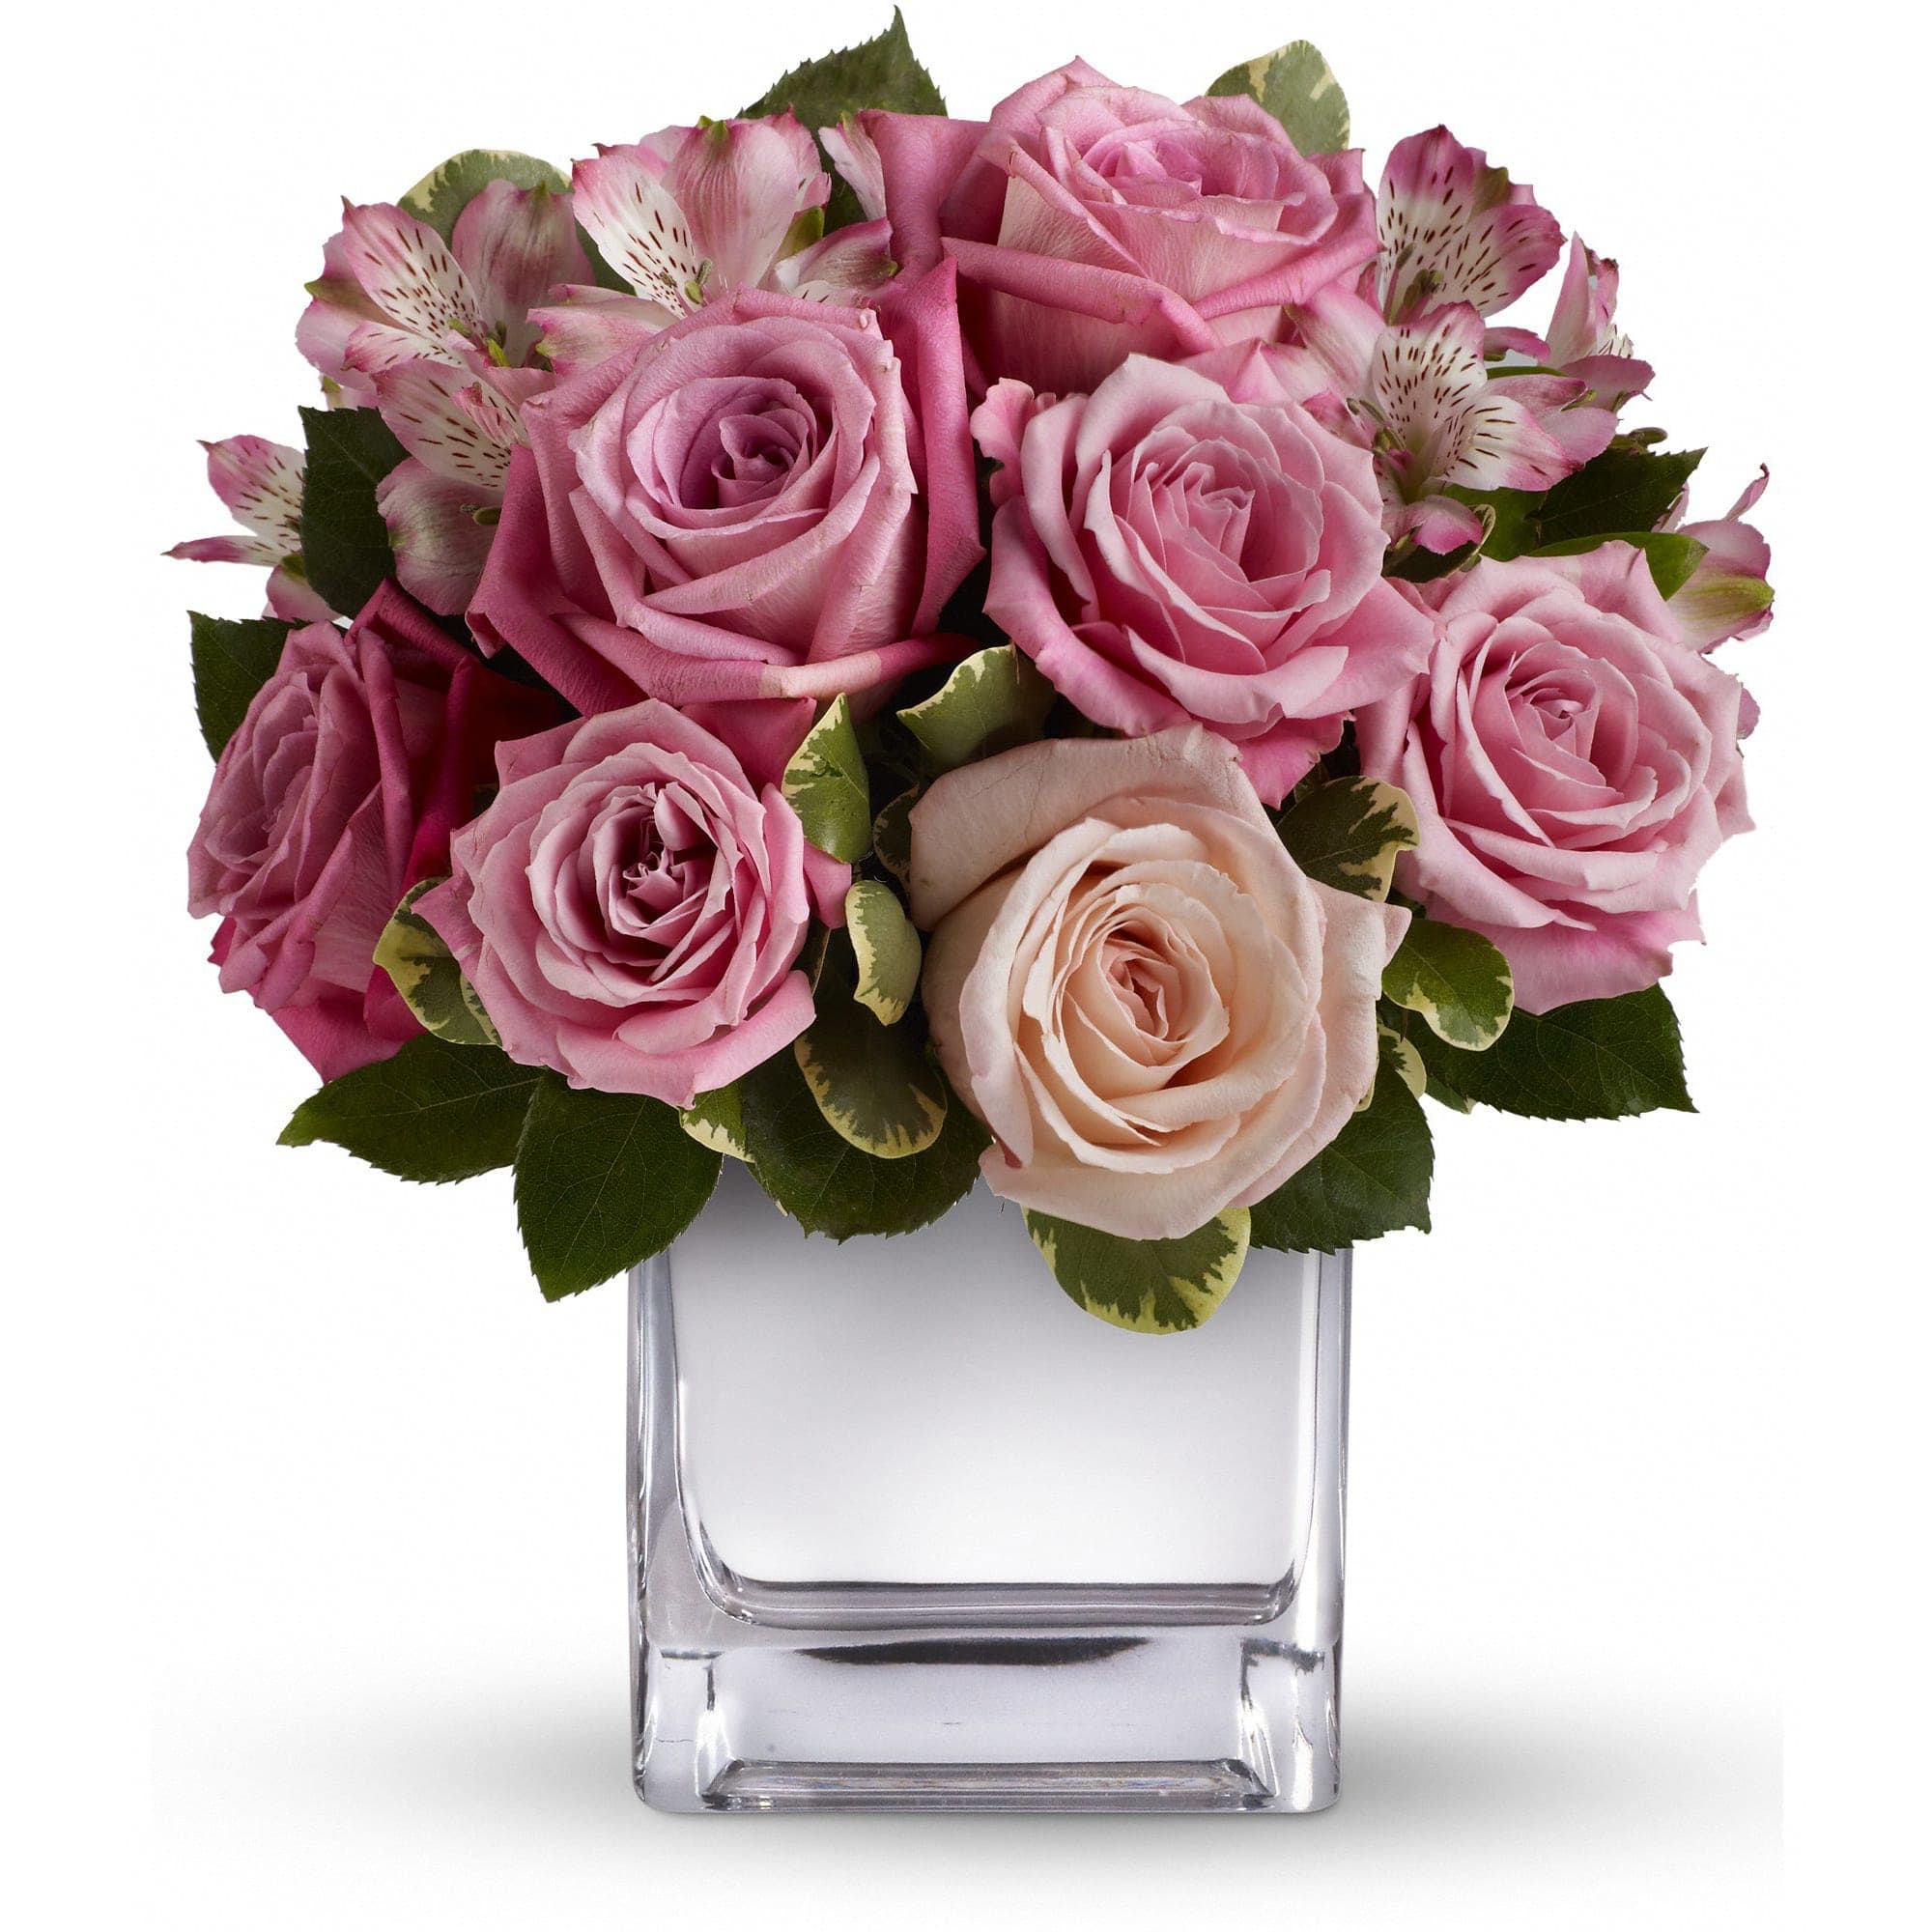 Teleflora's Rose Rendezvous Bouquet - This tastefully terrific bouquet features soft pink and lavender roses in a sleek contemporary silver cube vase. Understated and spectacular at the same time, it is a gorgeous gift that she'll long remember. 